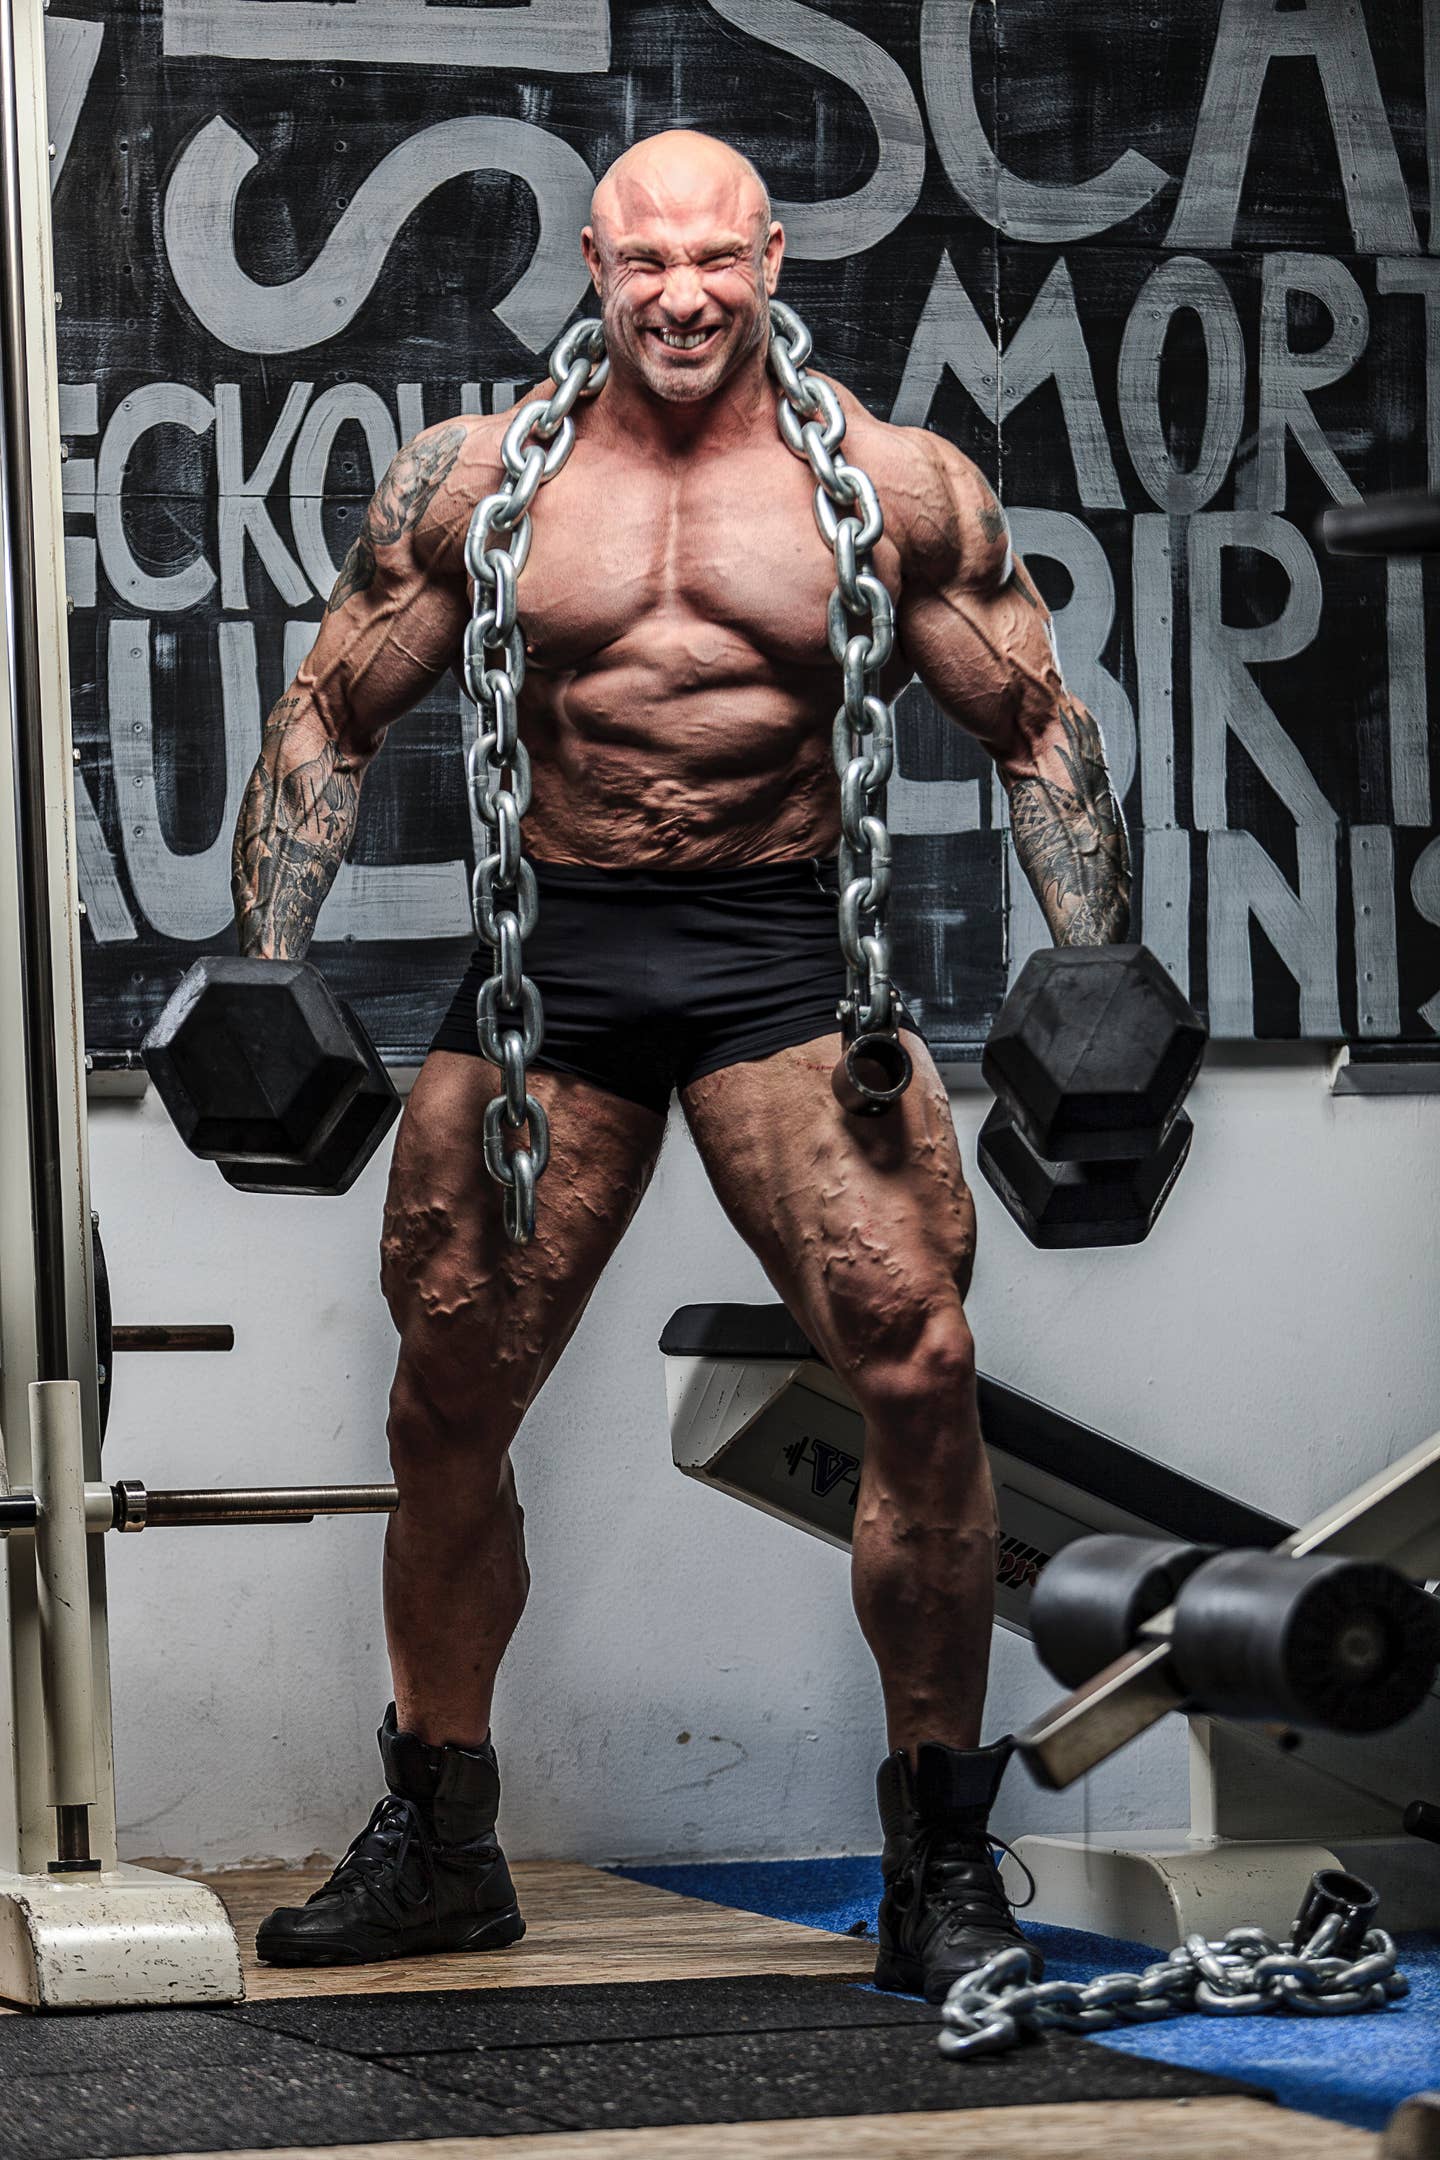 It takes a lot more than just weightlifting to look like this. Gains like this are made in a lab... Photo by <a href="https://unsplash.com/photos/hp3y7G7TALI?utm_source=unsplashutm_medium=referralutm_content=creditCopyText" target="_blank" rel="noopener">Damir Spanic</a> on <a href="https://unsplash.com/?utm_source=unsplashutm_medium=referralutm_content=creditCopyText" target="_blank" rel="noopener">Unsplash</a>